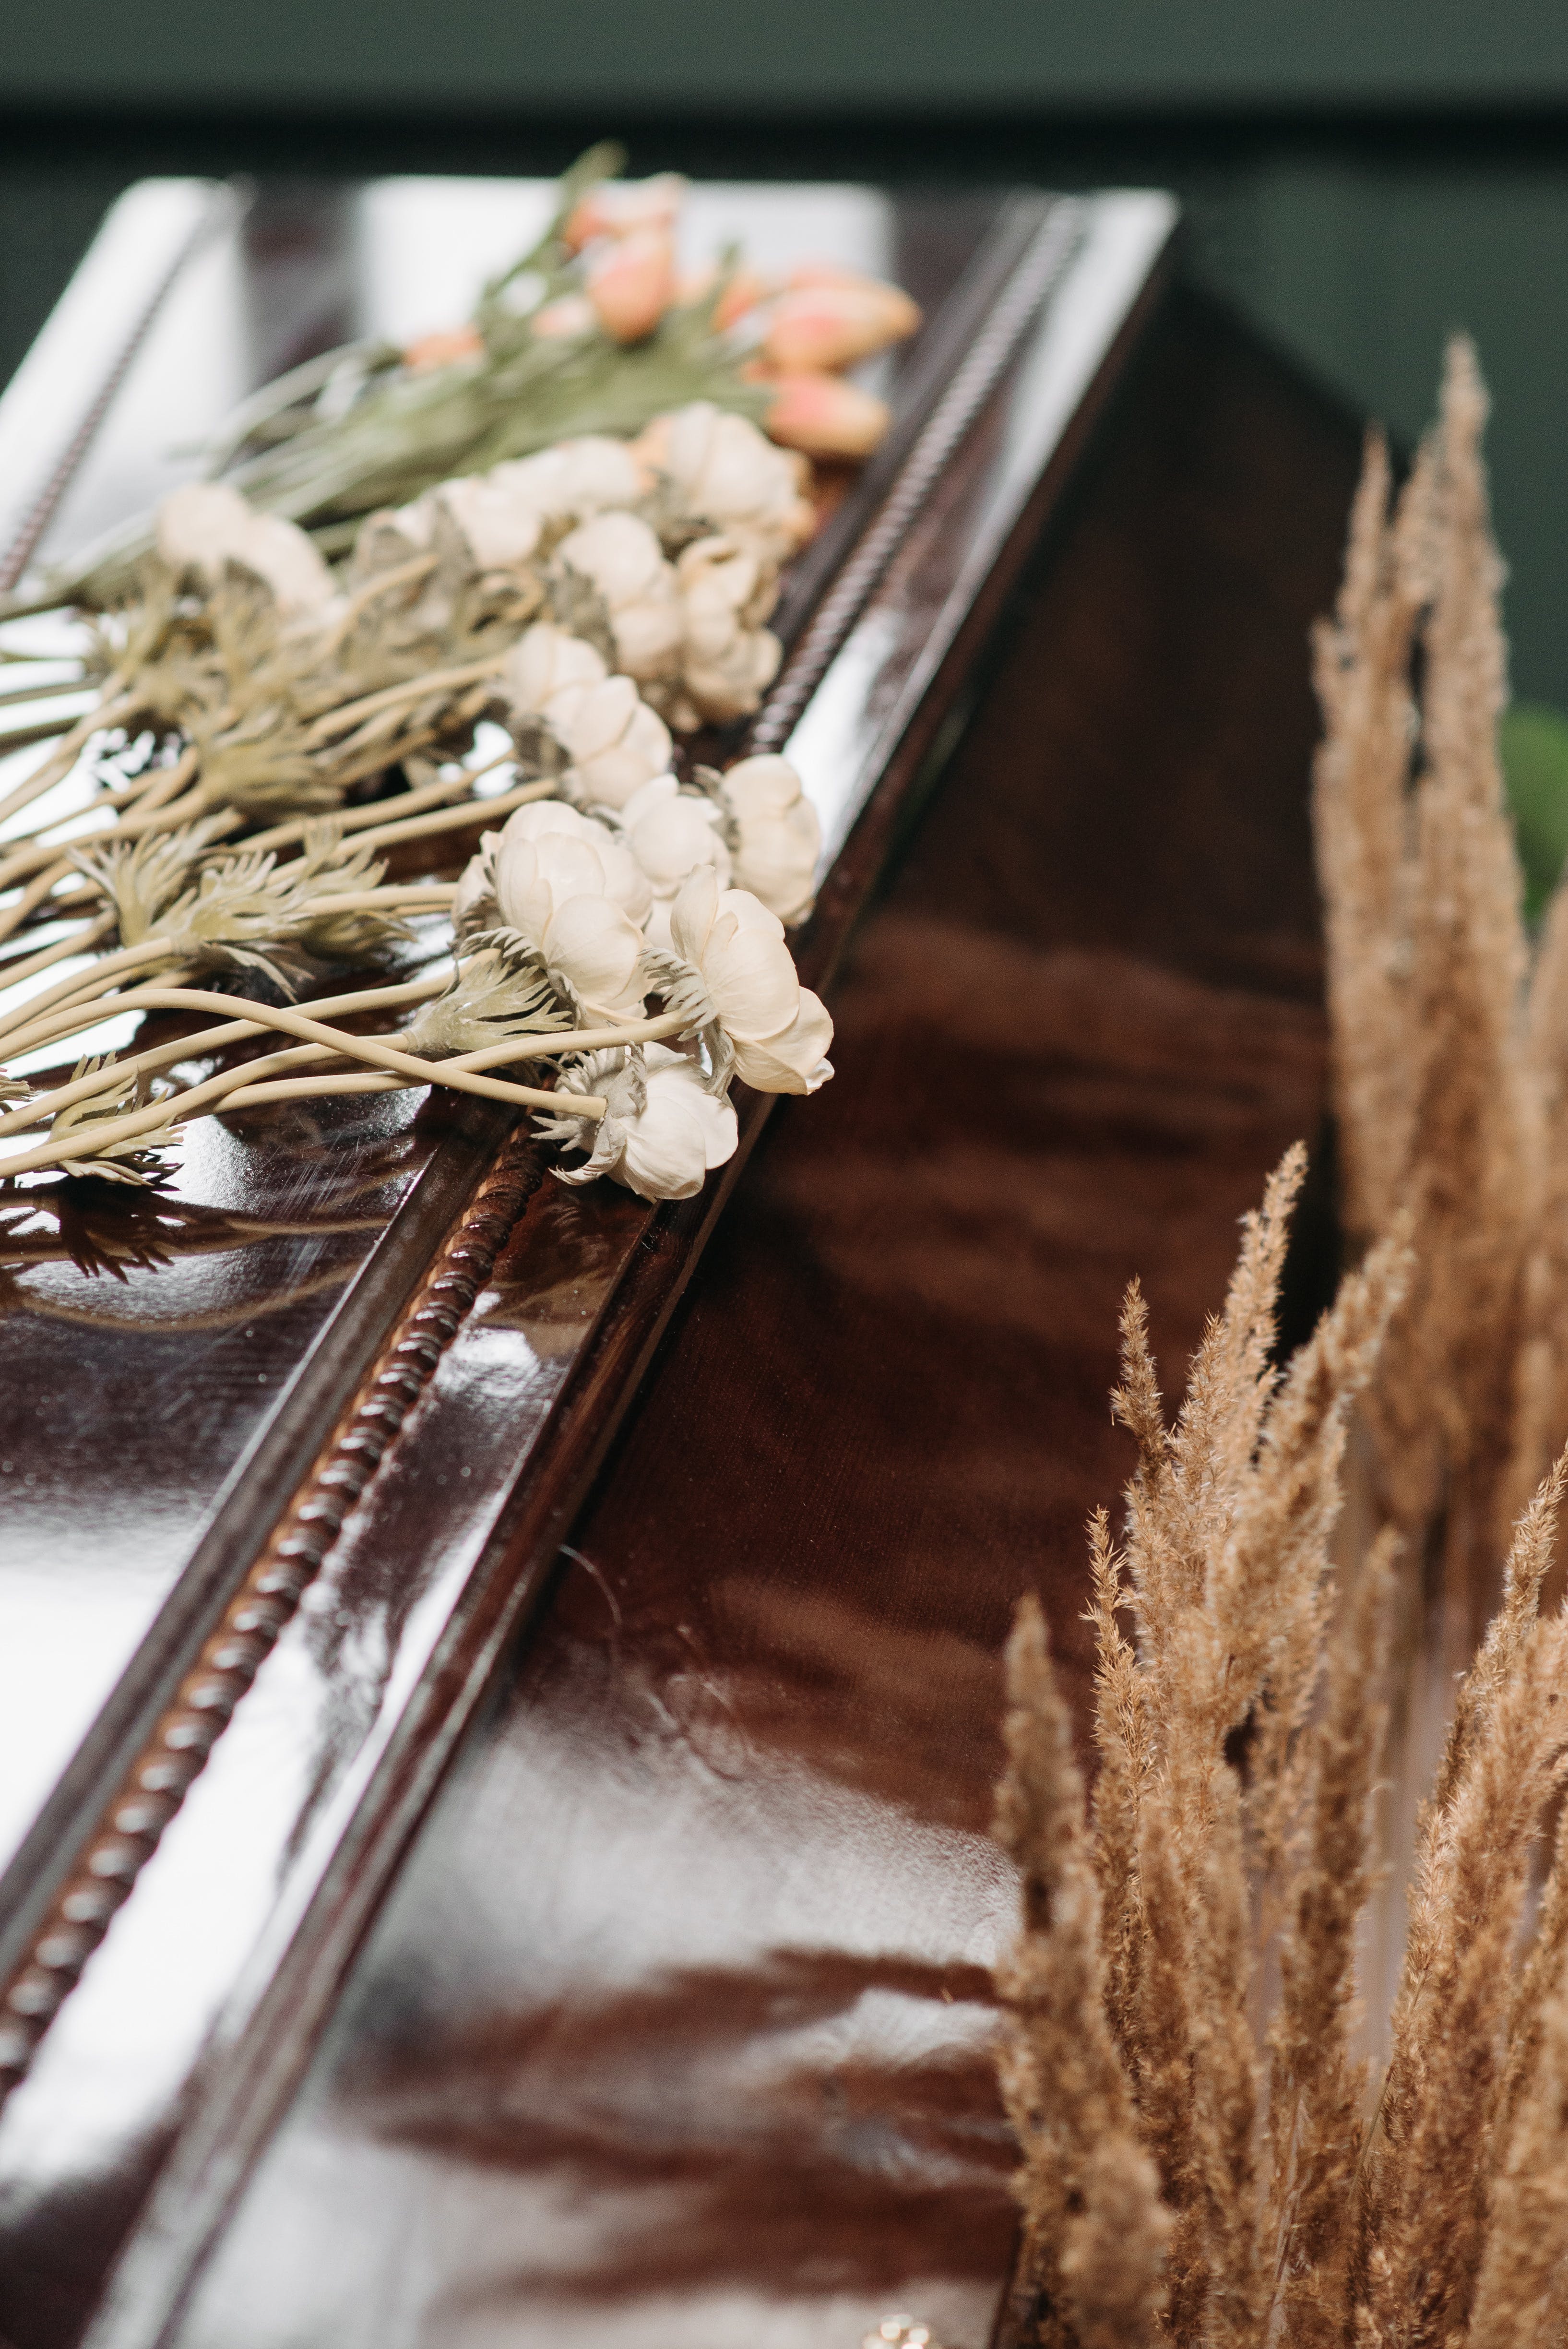 White flowers on the coffin. | Source: Pexels